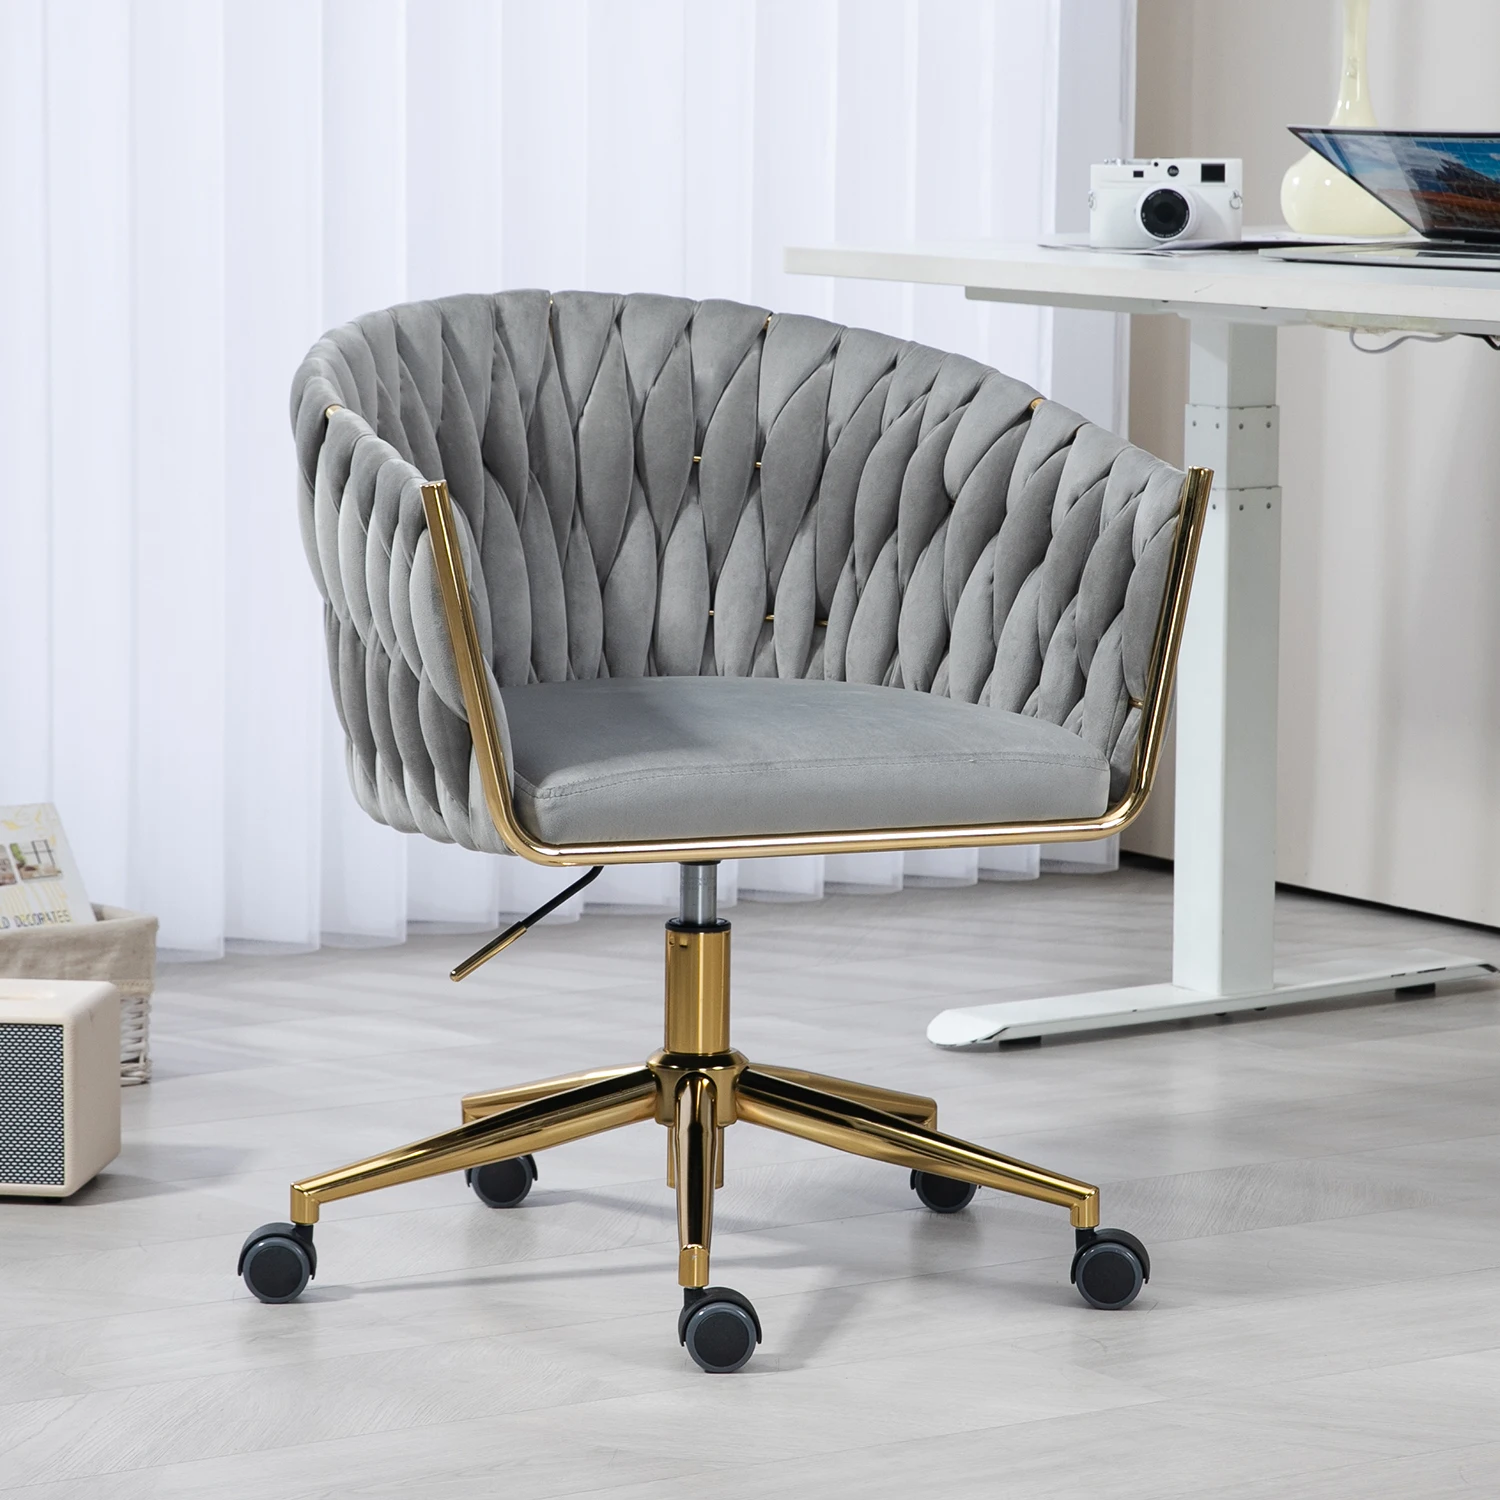 

Grey Modern Hand-Woven Office Chair with Height Adjustable Backrest and 360° Swivel Wheels for Bedroom or Living Room